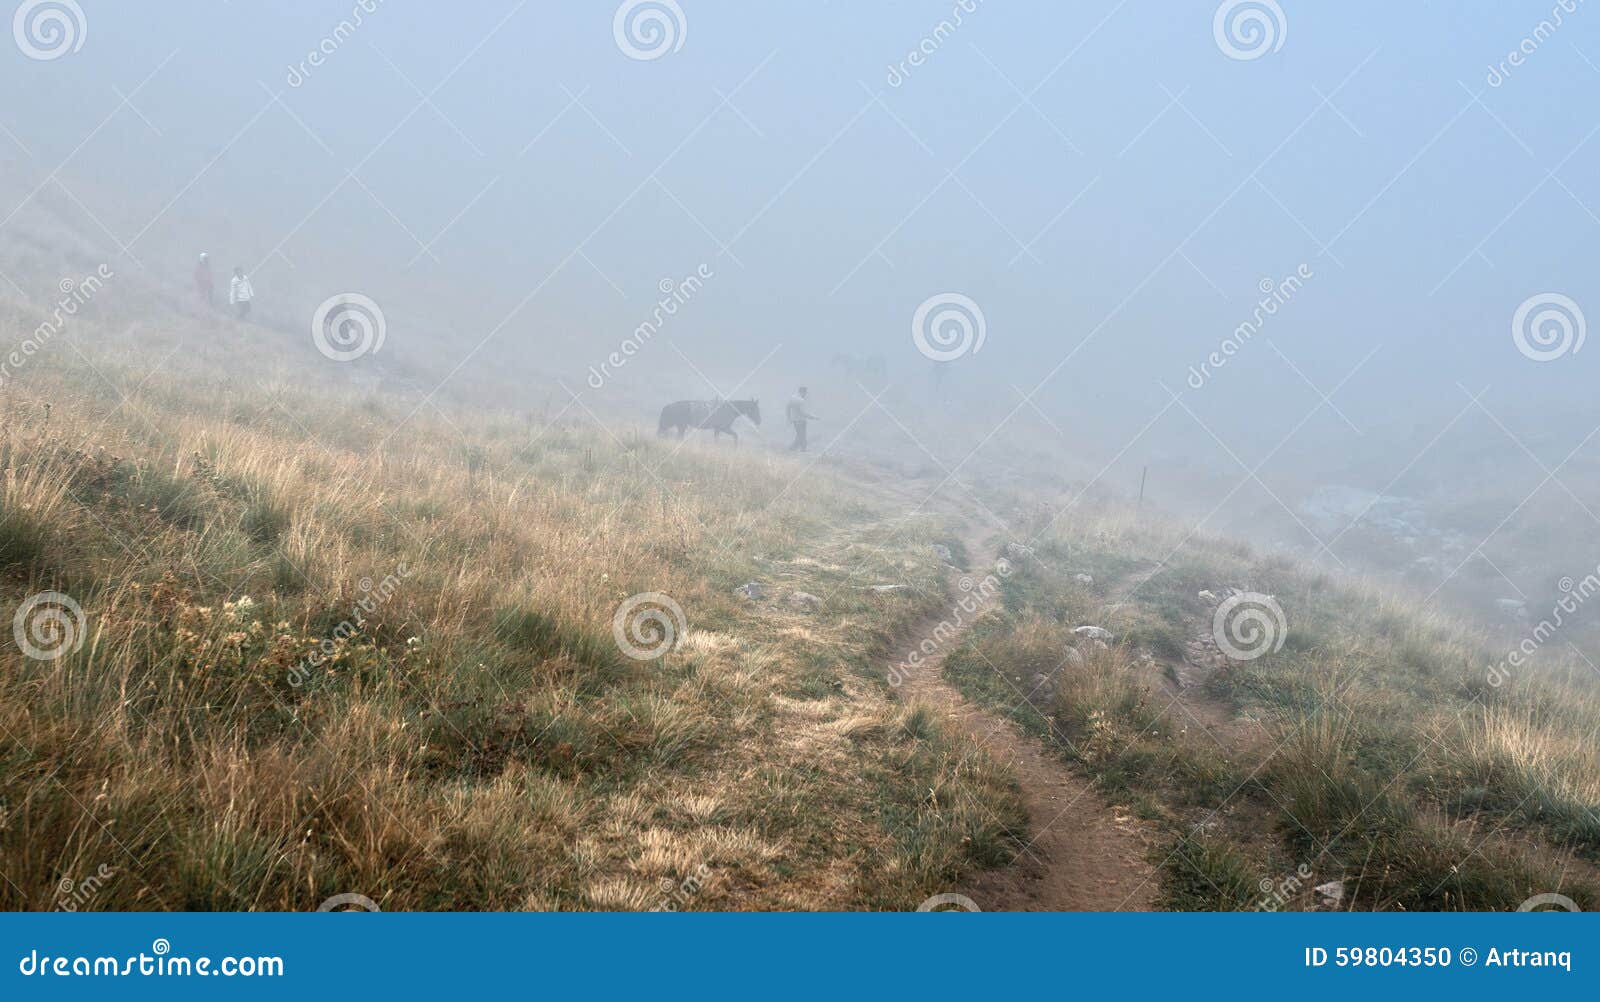 herder and horses in fog